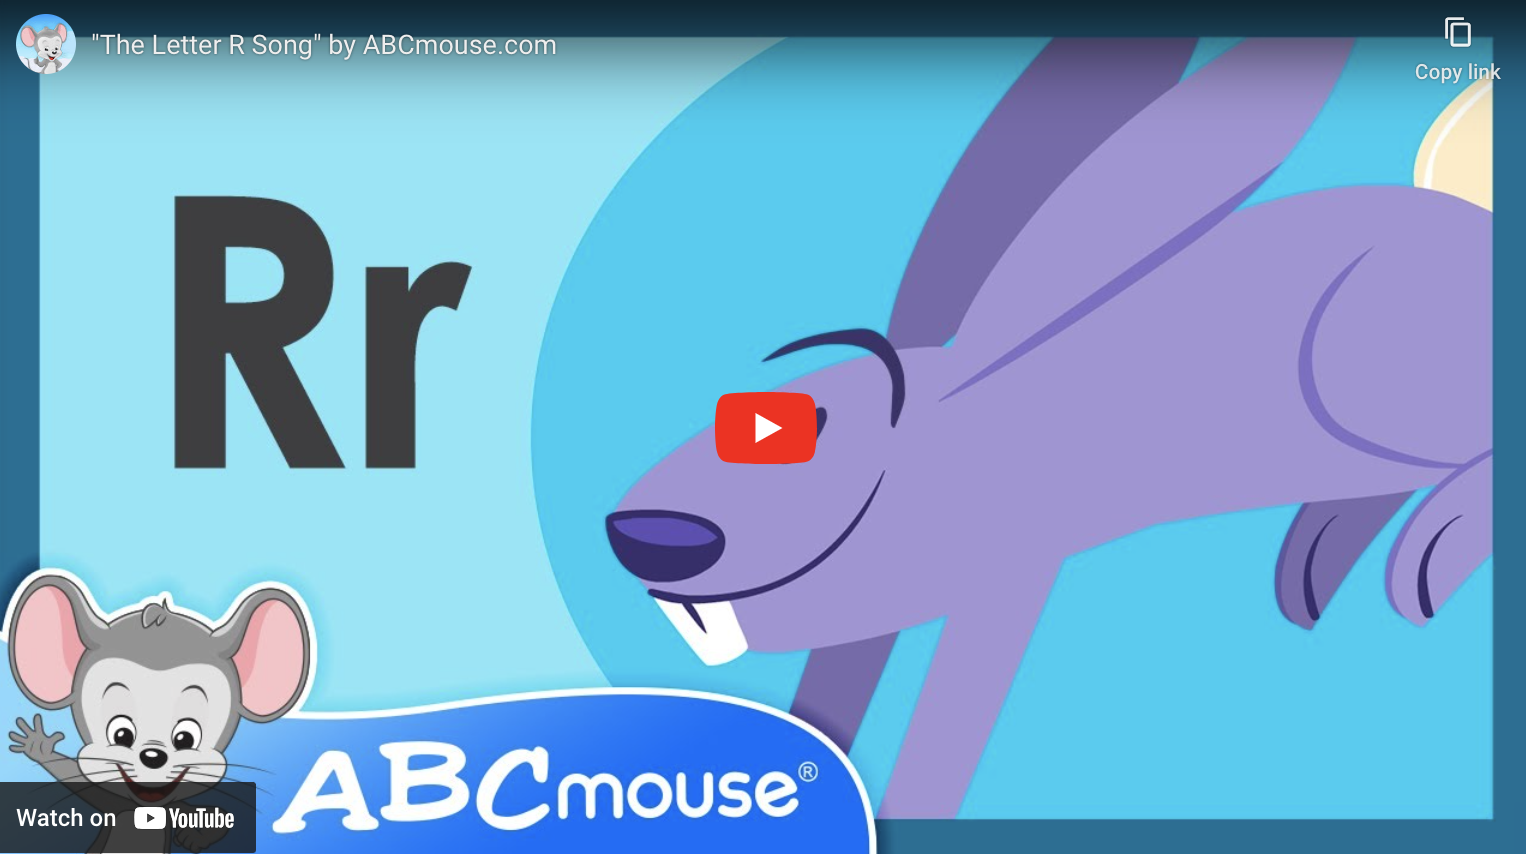 Letter R song from ABCmouse.com. 